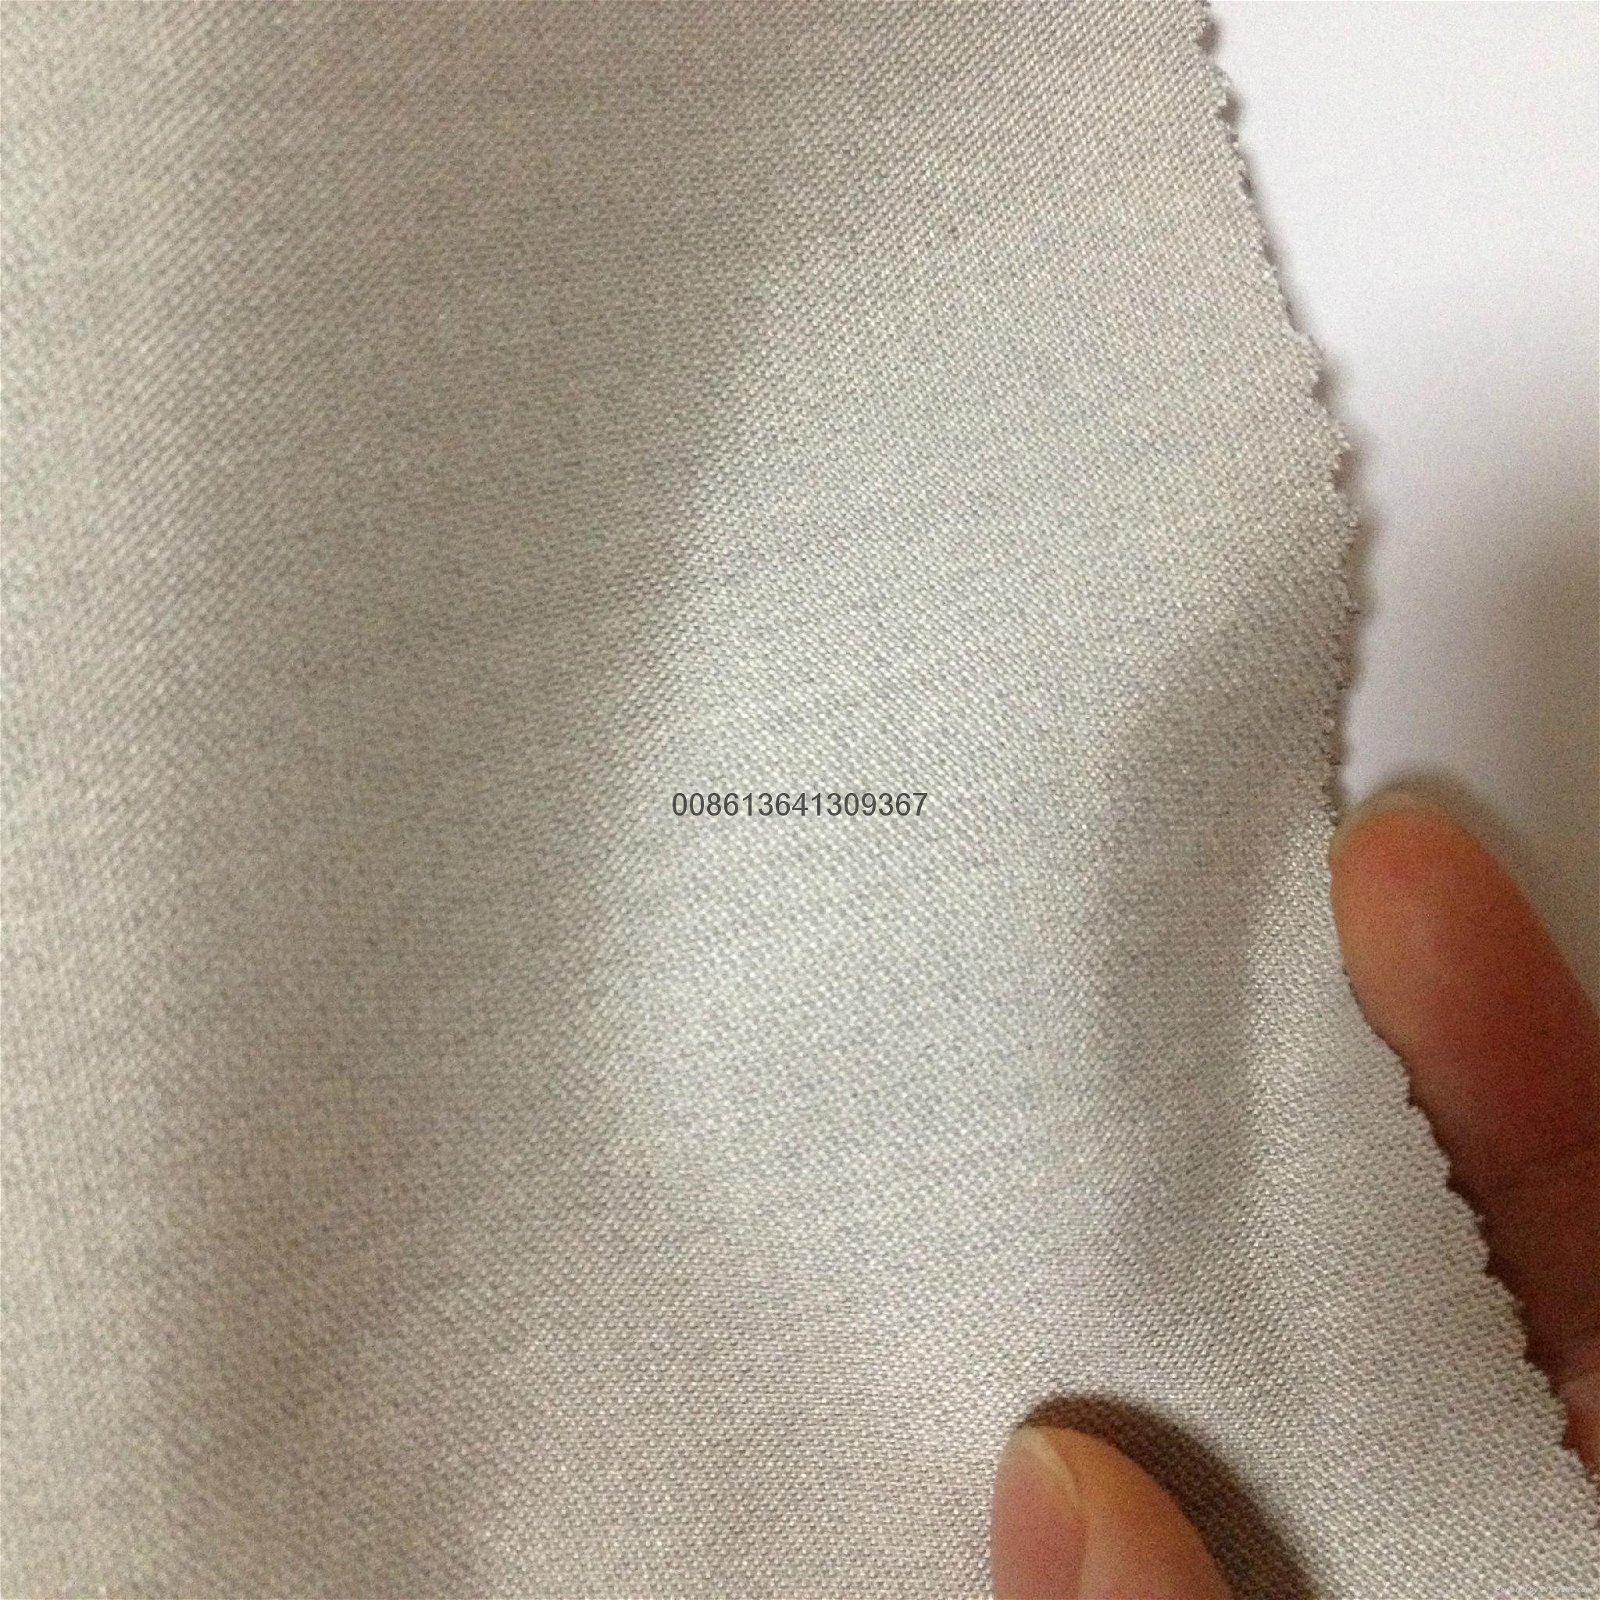 bamboo+silver emf fabric for radiation protection clothing  2